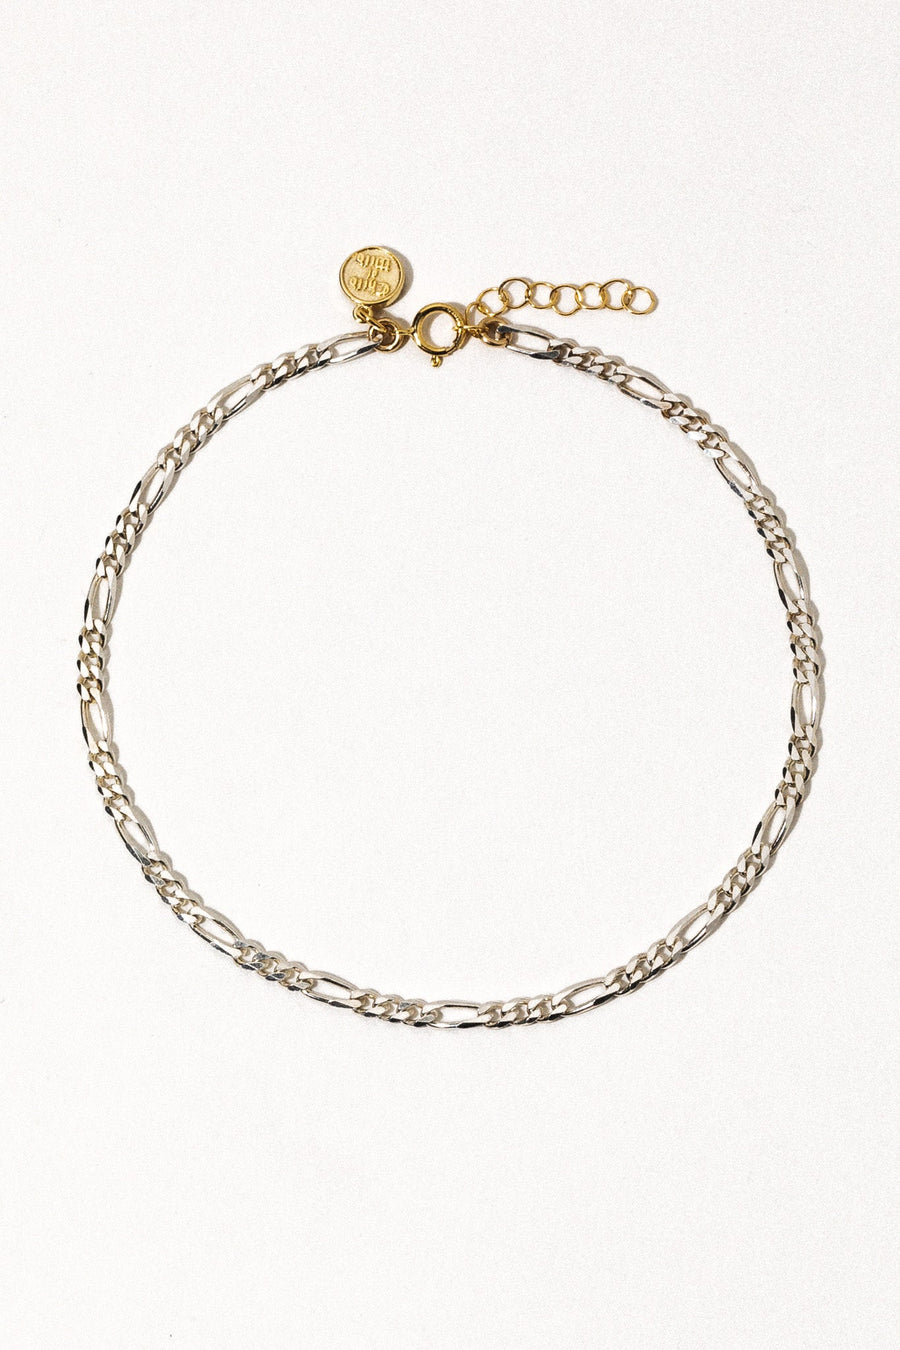 CGM Jewelry Silver Basic II Anklet